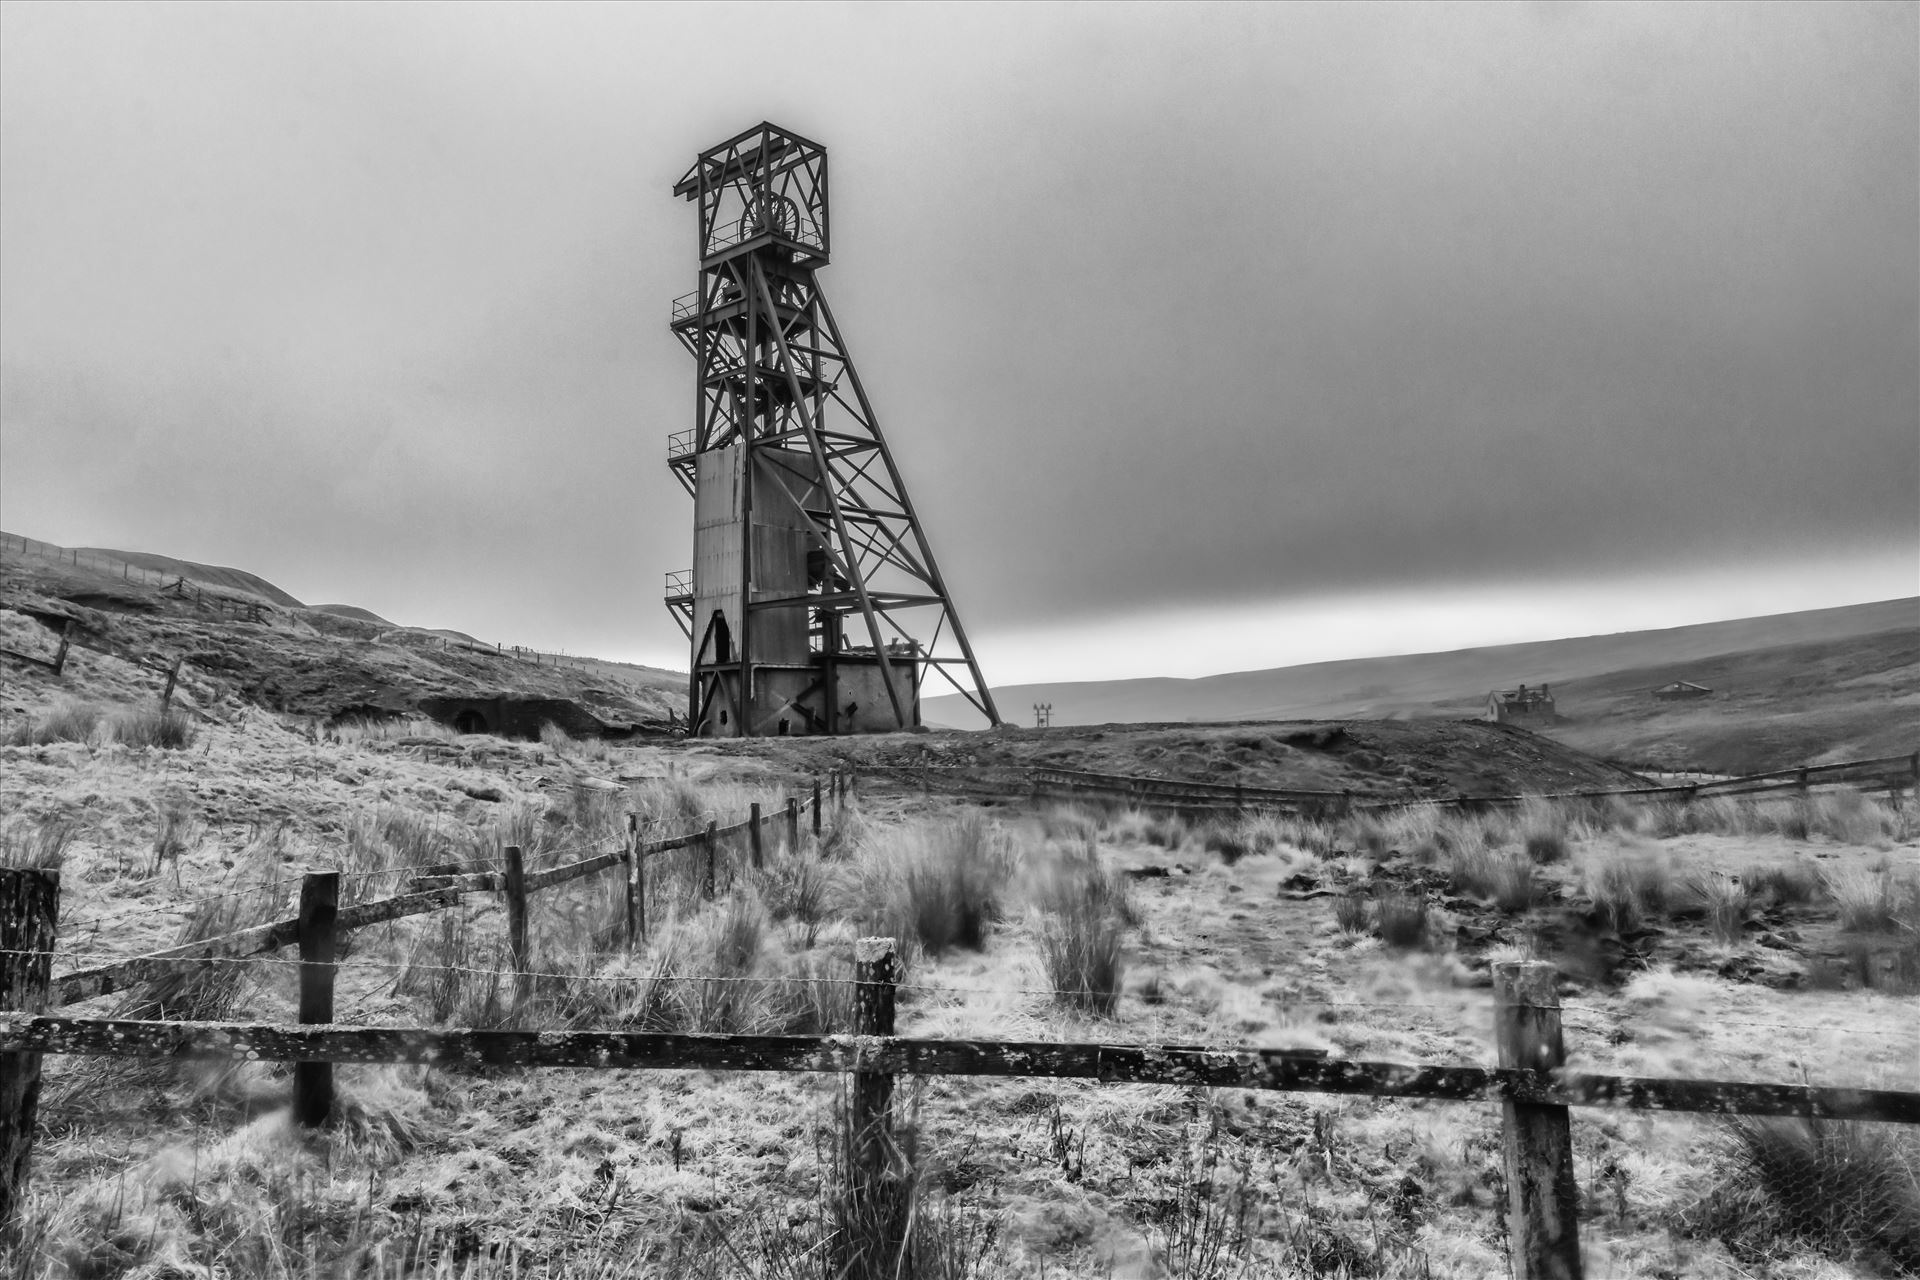 Groverake mine, Weardale - This mine in a remote part of Weardale was first in operation in the 18th century, initially mining for iron ore but this was not as productive as had been hoped so they later switched to mining for fluorspar until the closure in 1999. by philreay